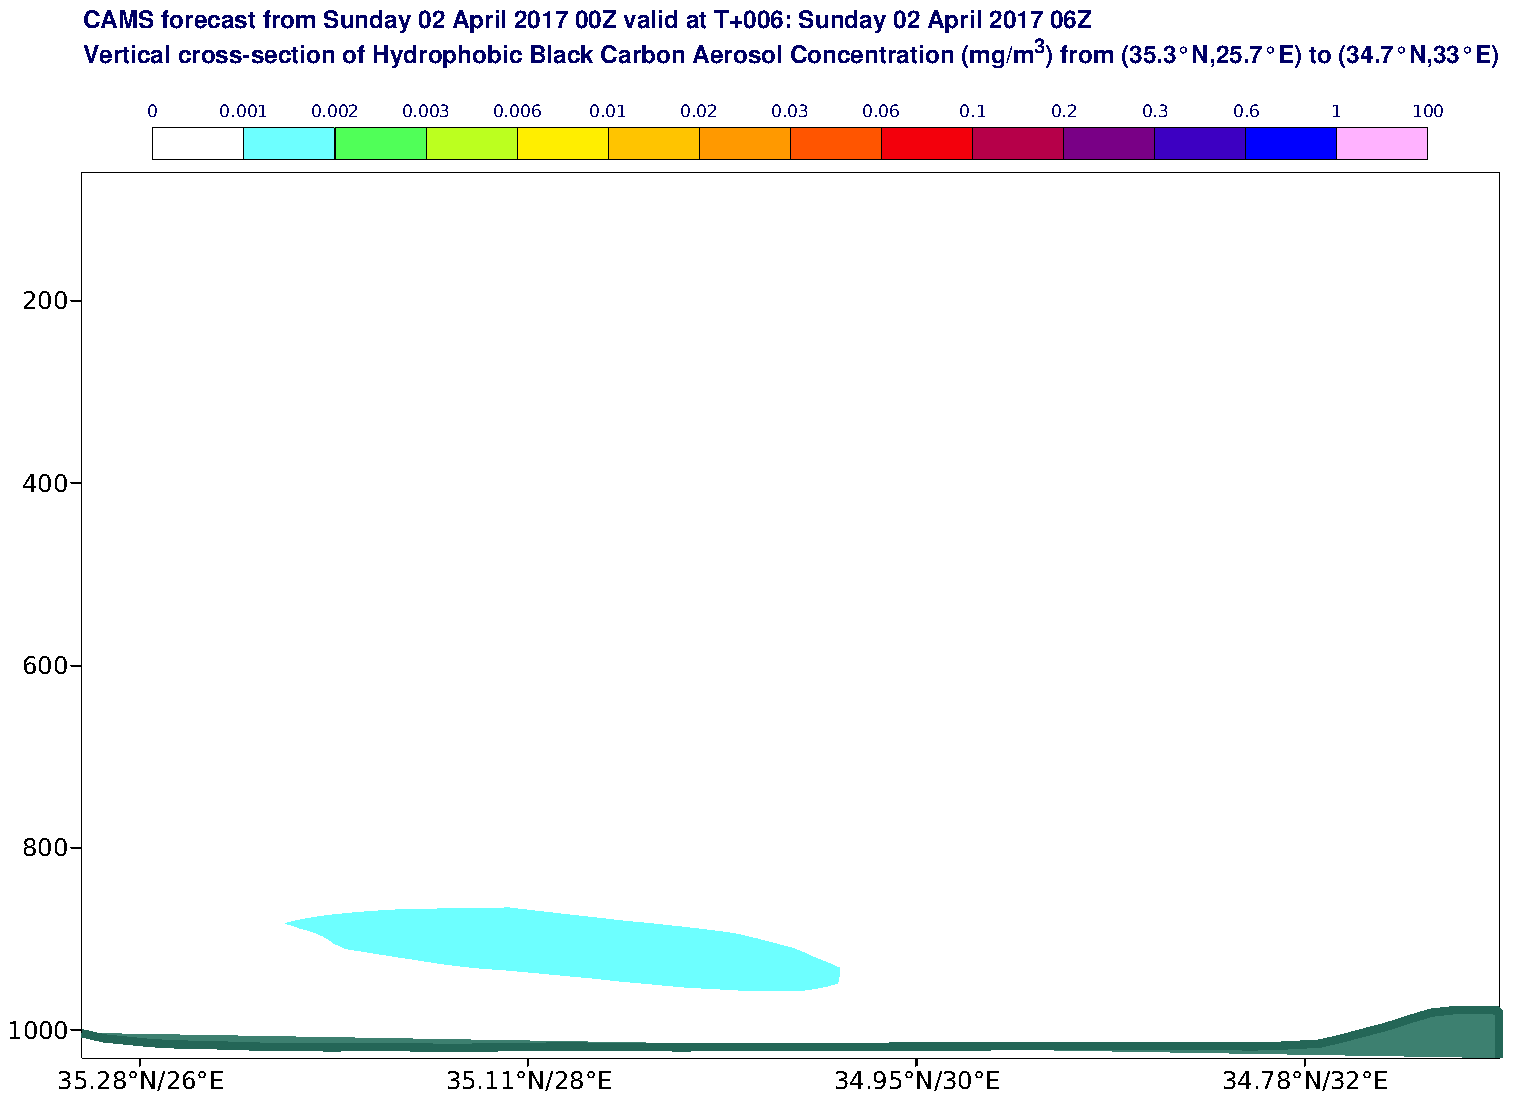 Vertical cross-section of Hydrophobic Black Carbon Aerosol Concentration (mg/m3) valid at T6 - 2017-04-02 06:00